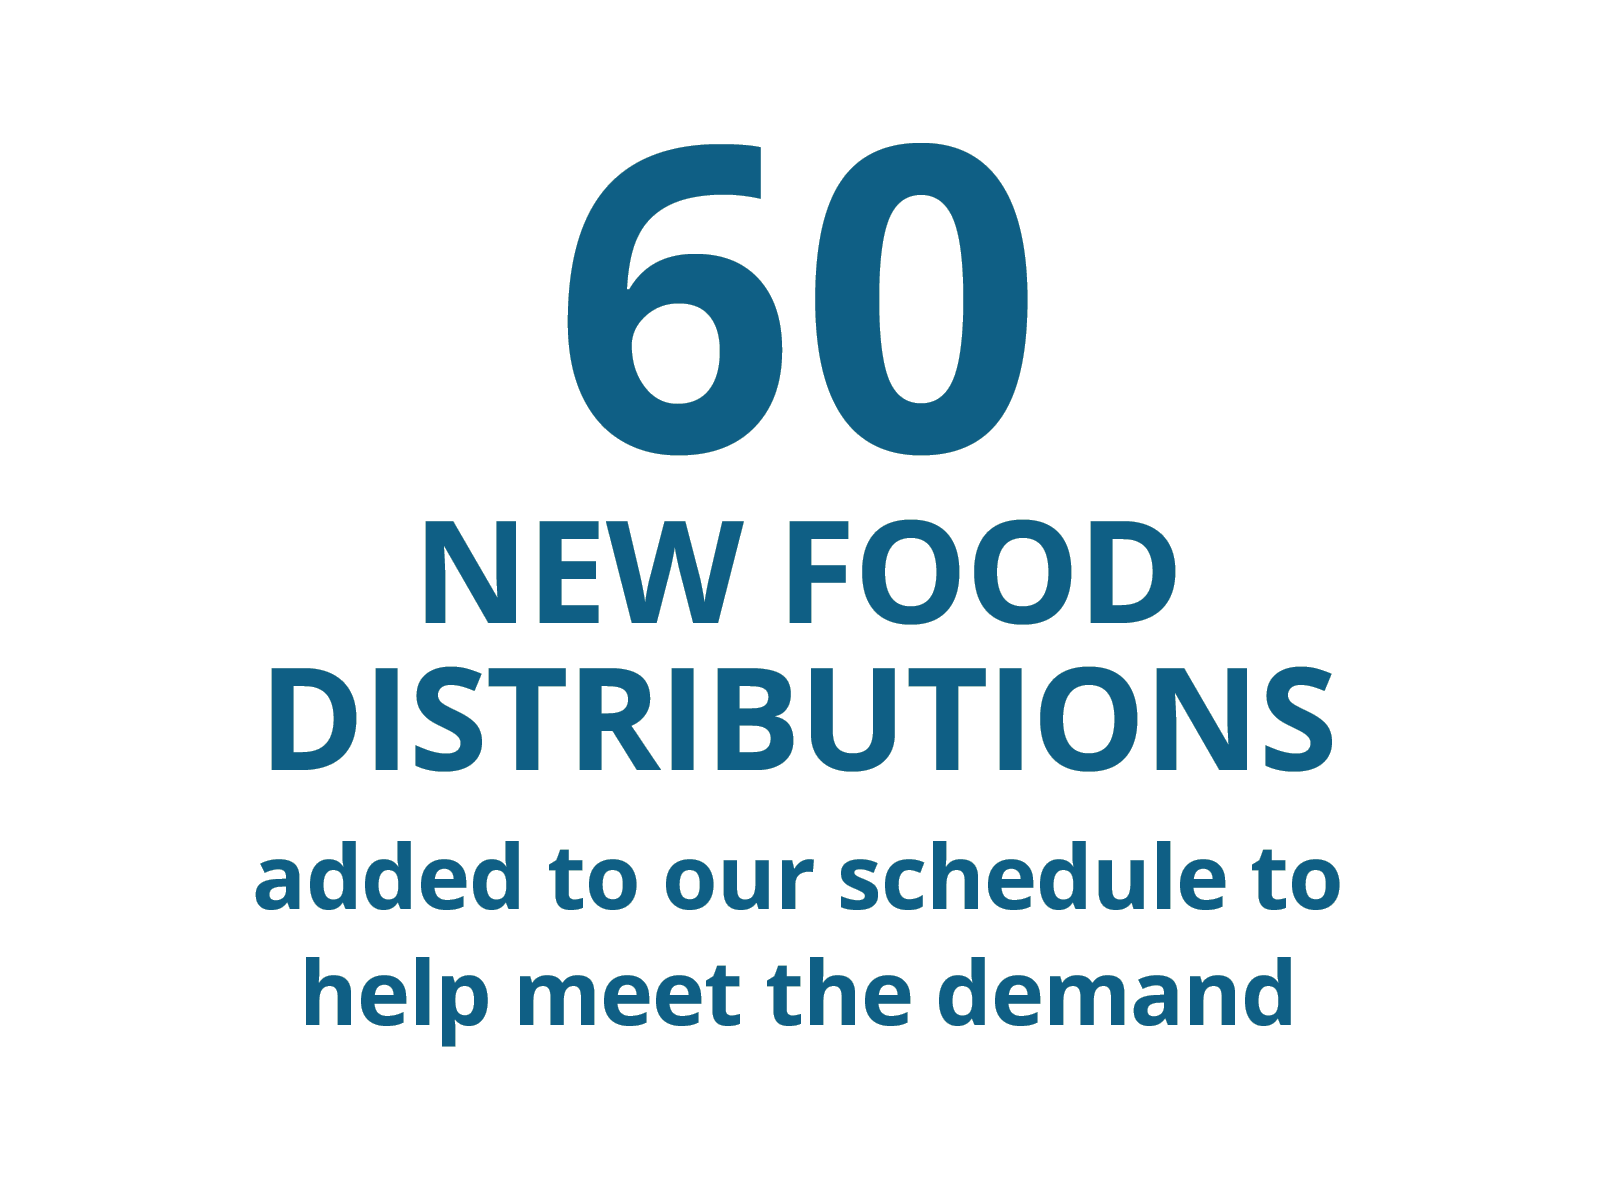 60 new food distributions aded to our schedule to help meet the demand